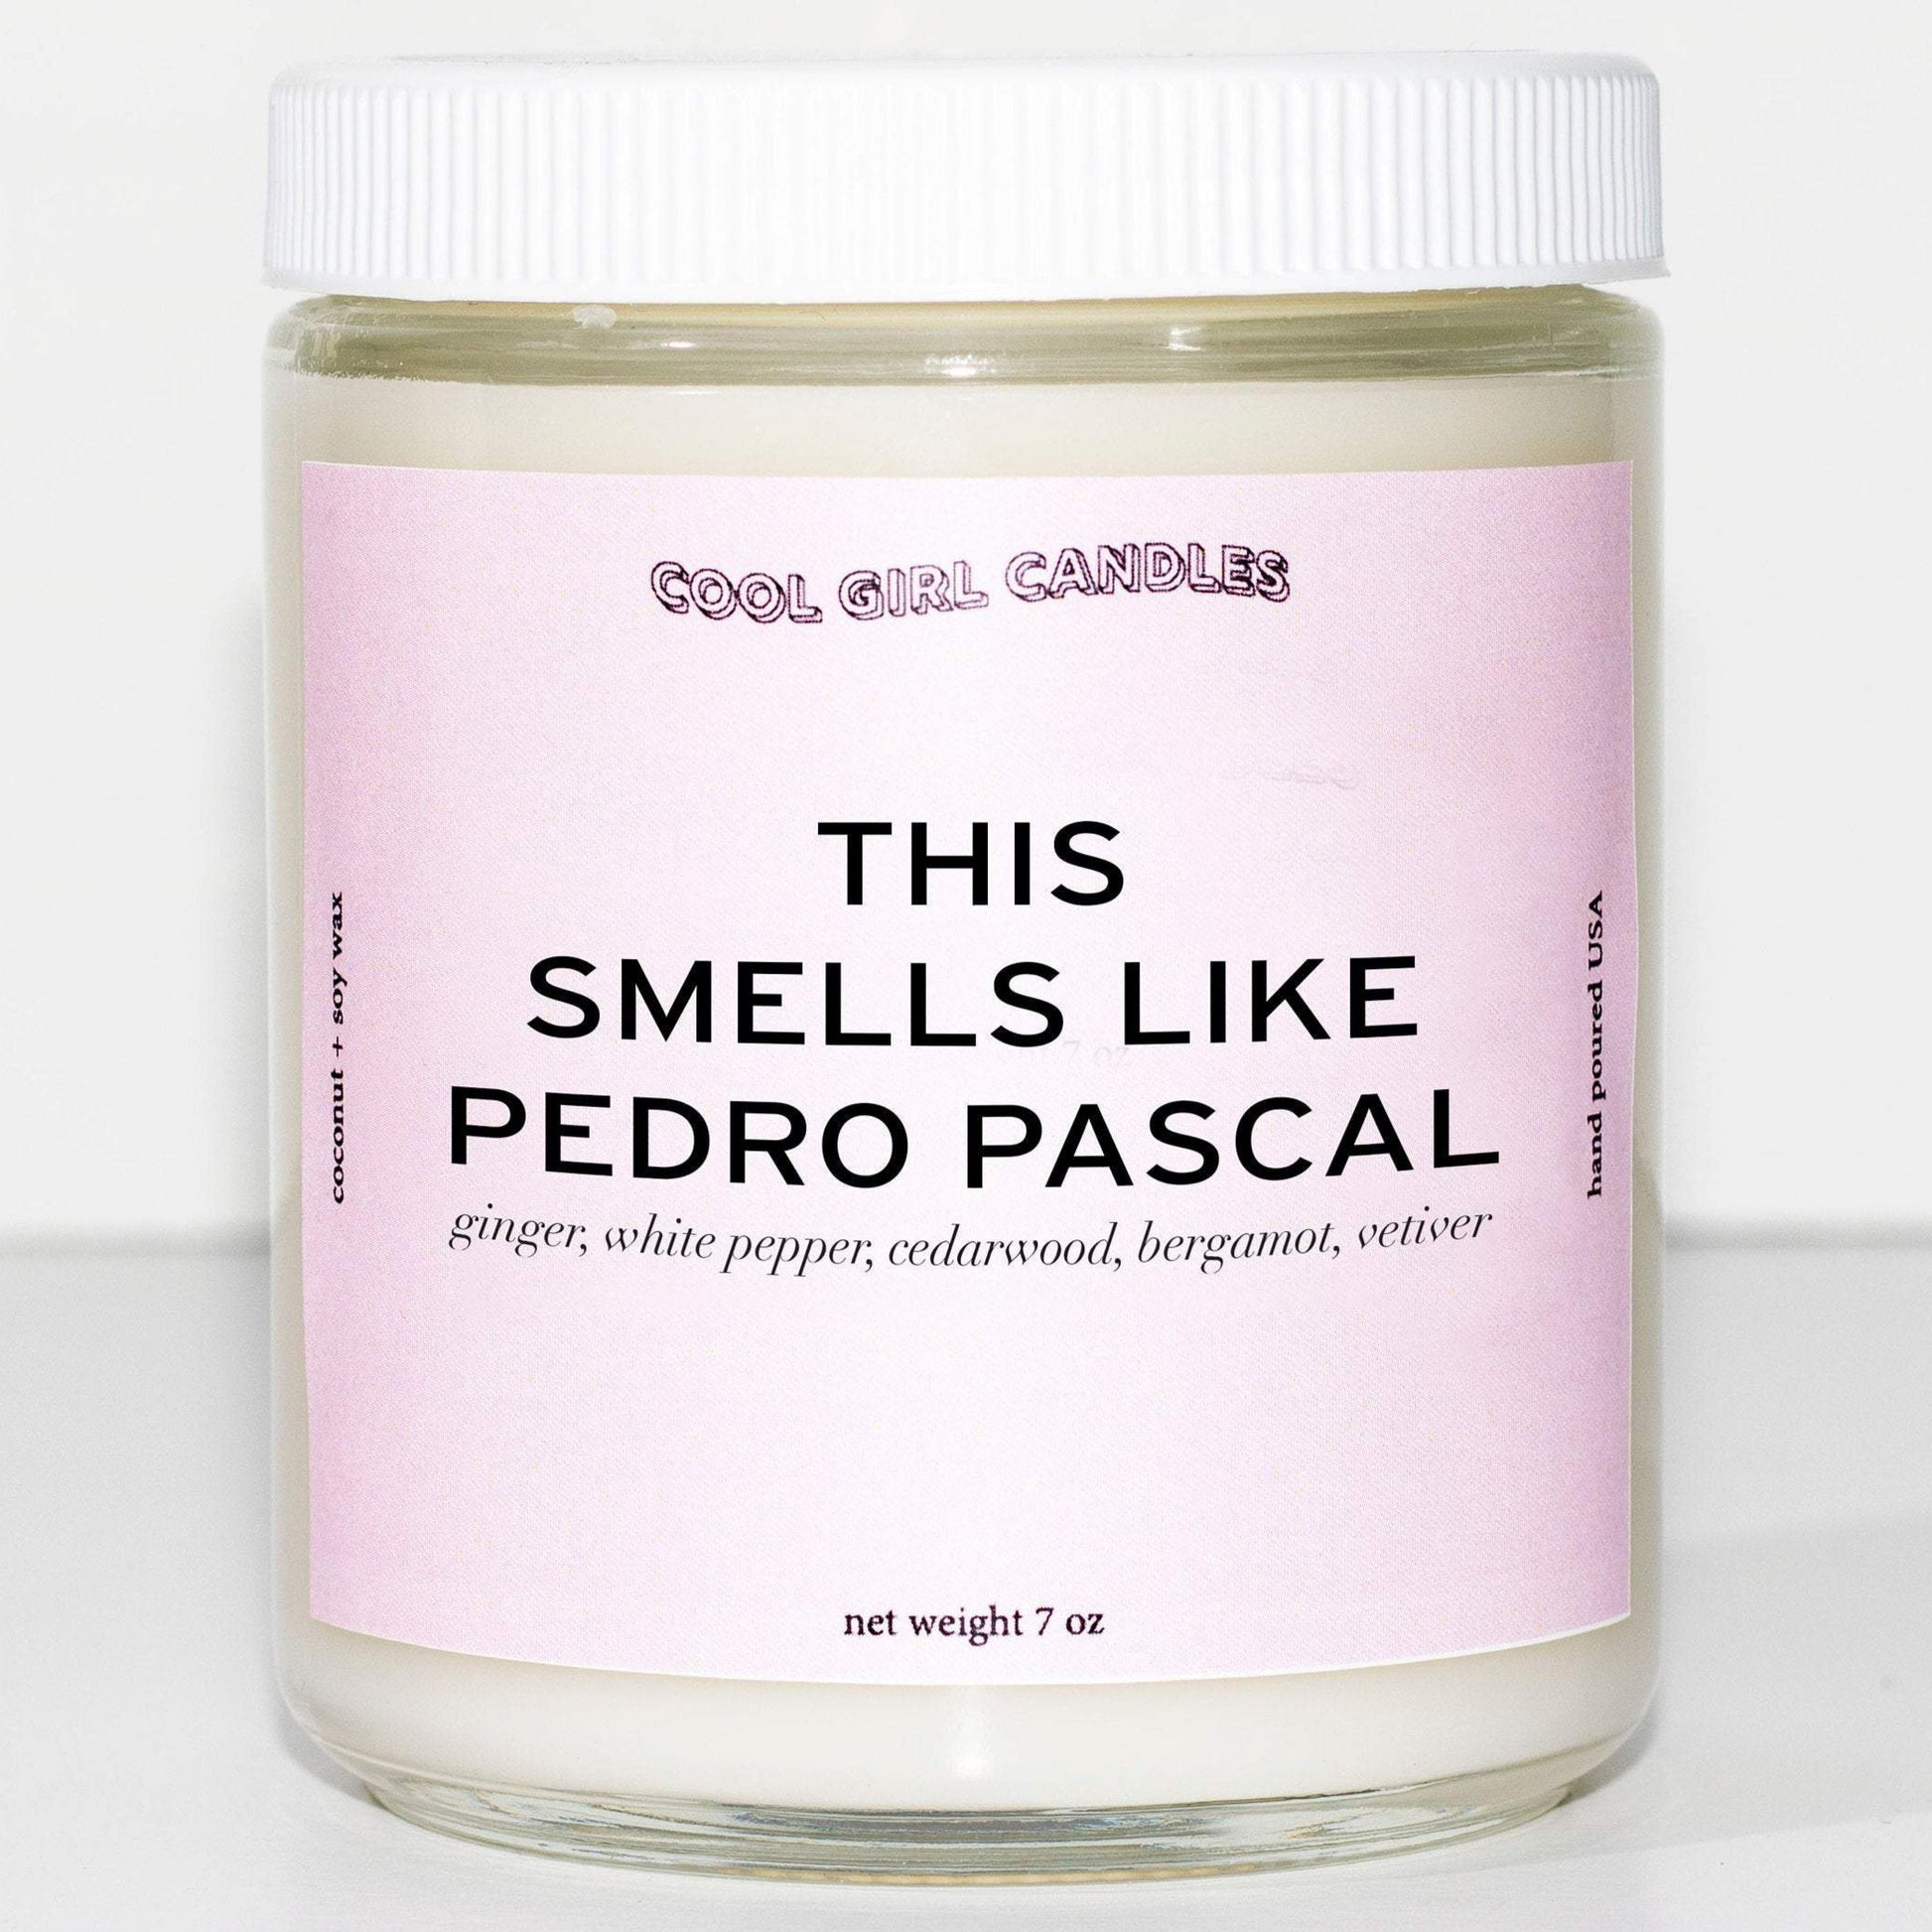 this smells like pedro pascal candle by cool girl candles